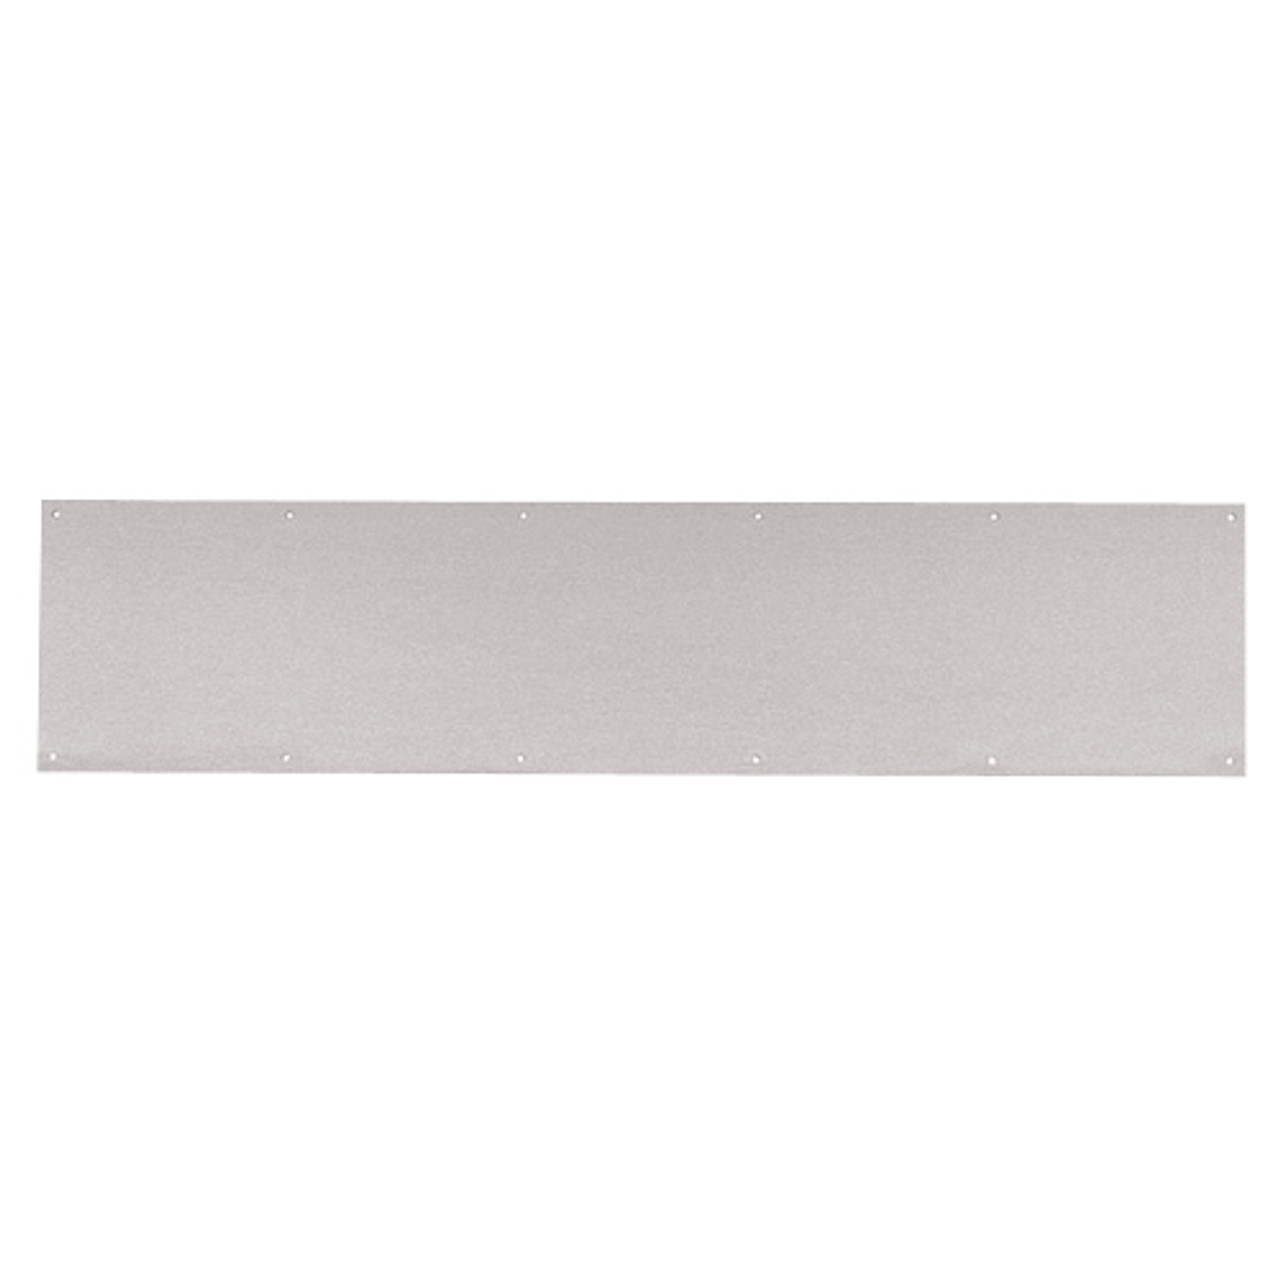 8400-US32D-8x36-B-CS Ives 8400 Series Protection Plate in Satin Stainless Steel